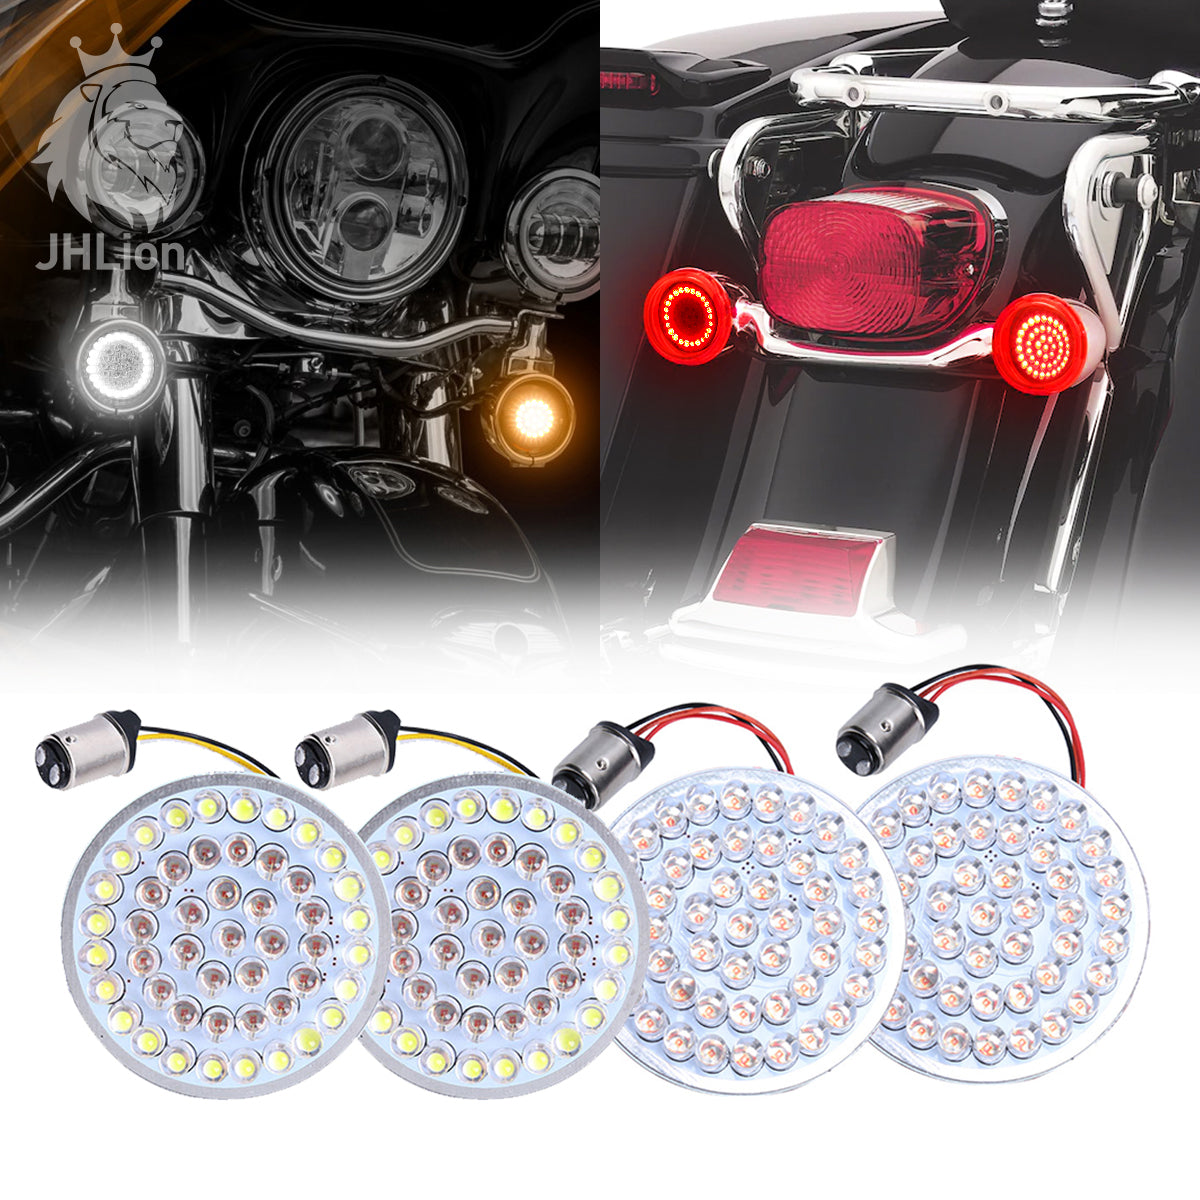 1157 Bullet Front Amber Turn Signal Bulb White Running Light Amazicha 2” LED Turn Signals Smoke Lens Cover Compatible for Harley Davidson Softail Dyna Sportster Touring 